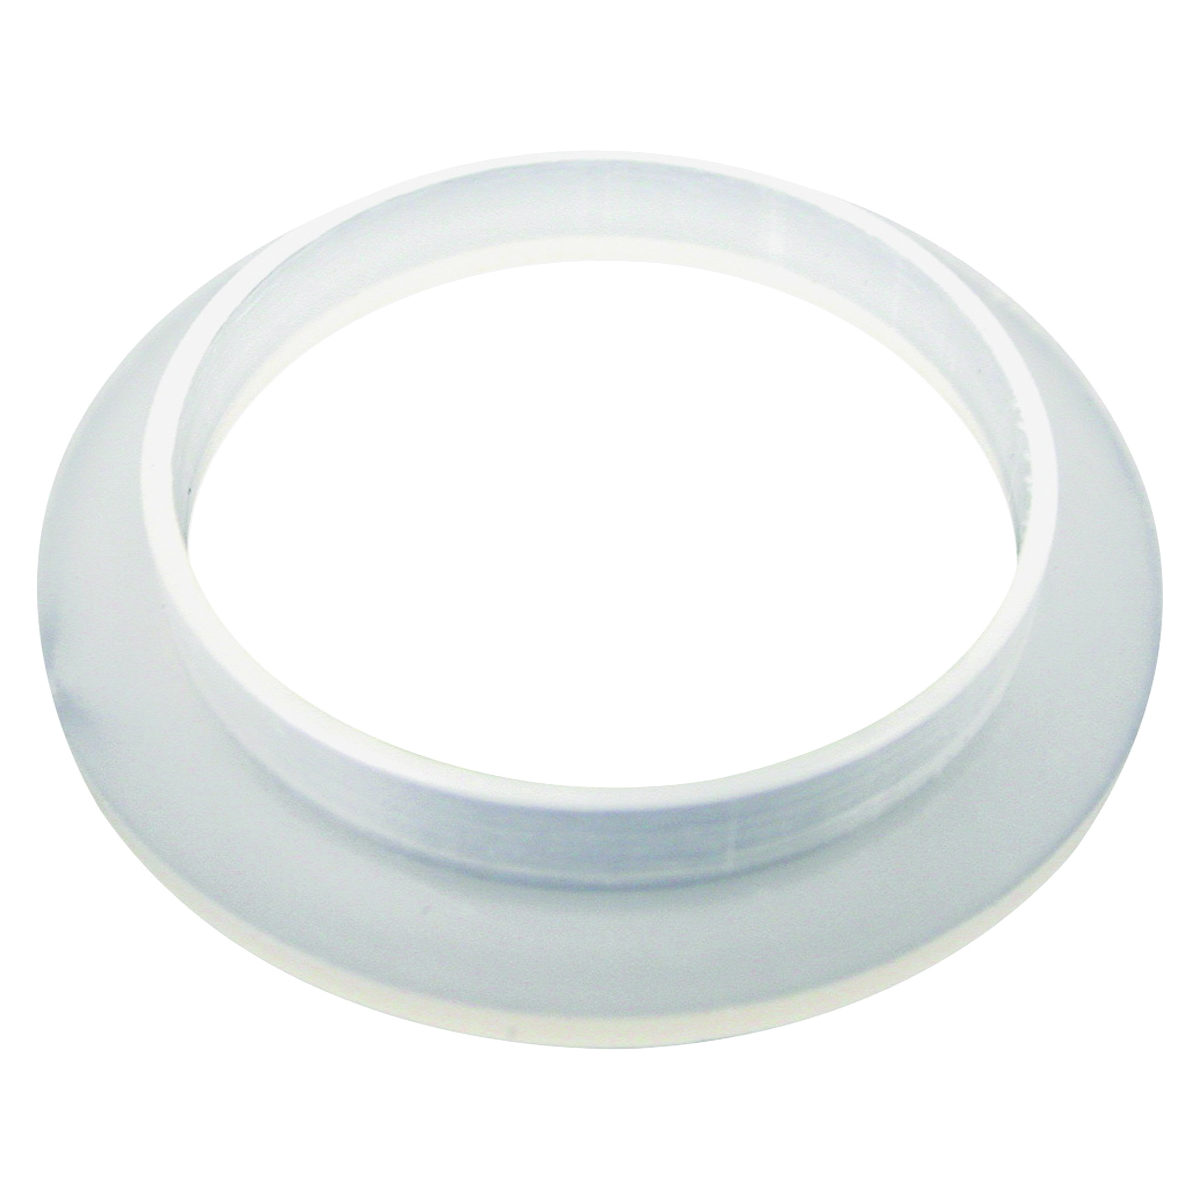 PMB-086 Tailpiece Washer, 1-3/4 in OD and 1-1/4 in ID, 1-1/2 in Dia, 1 mm Thick